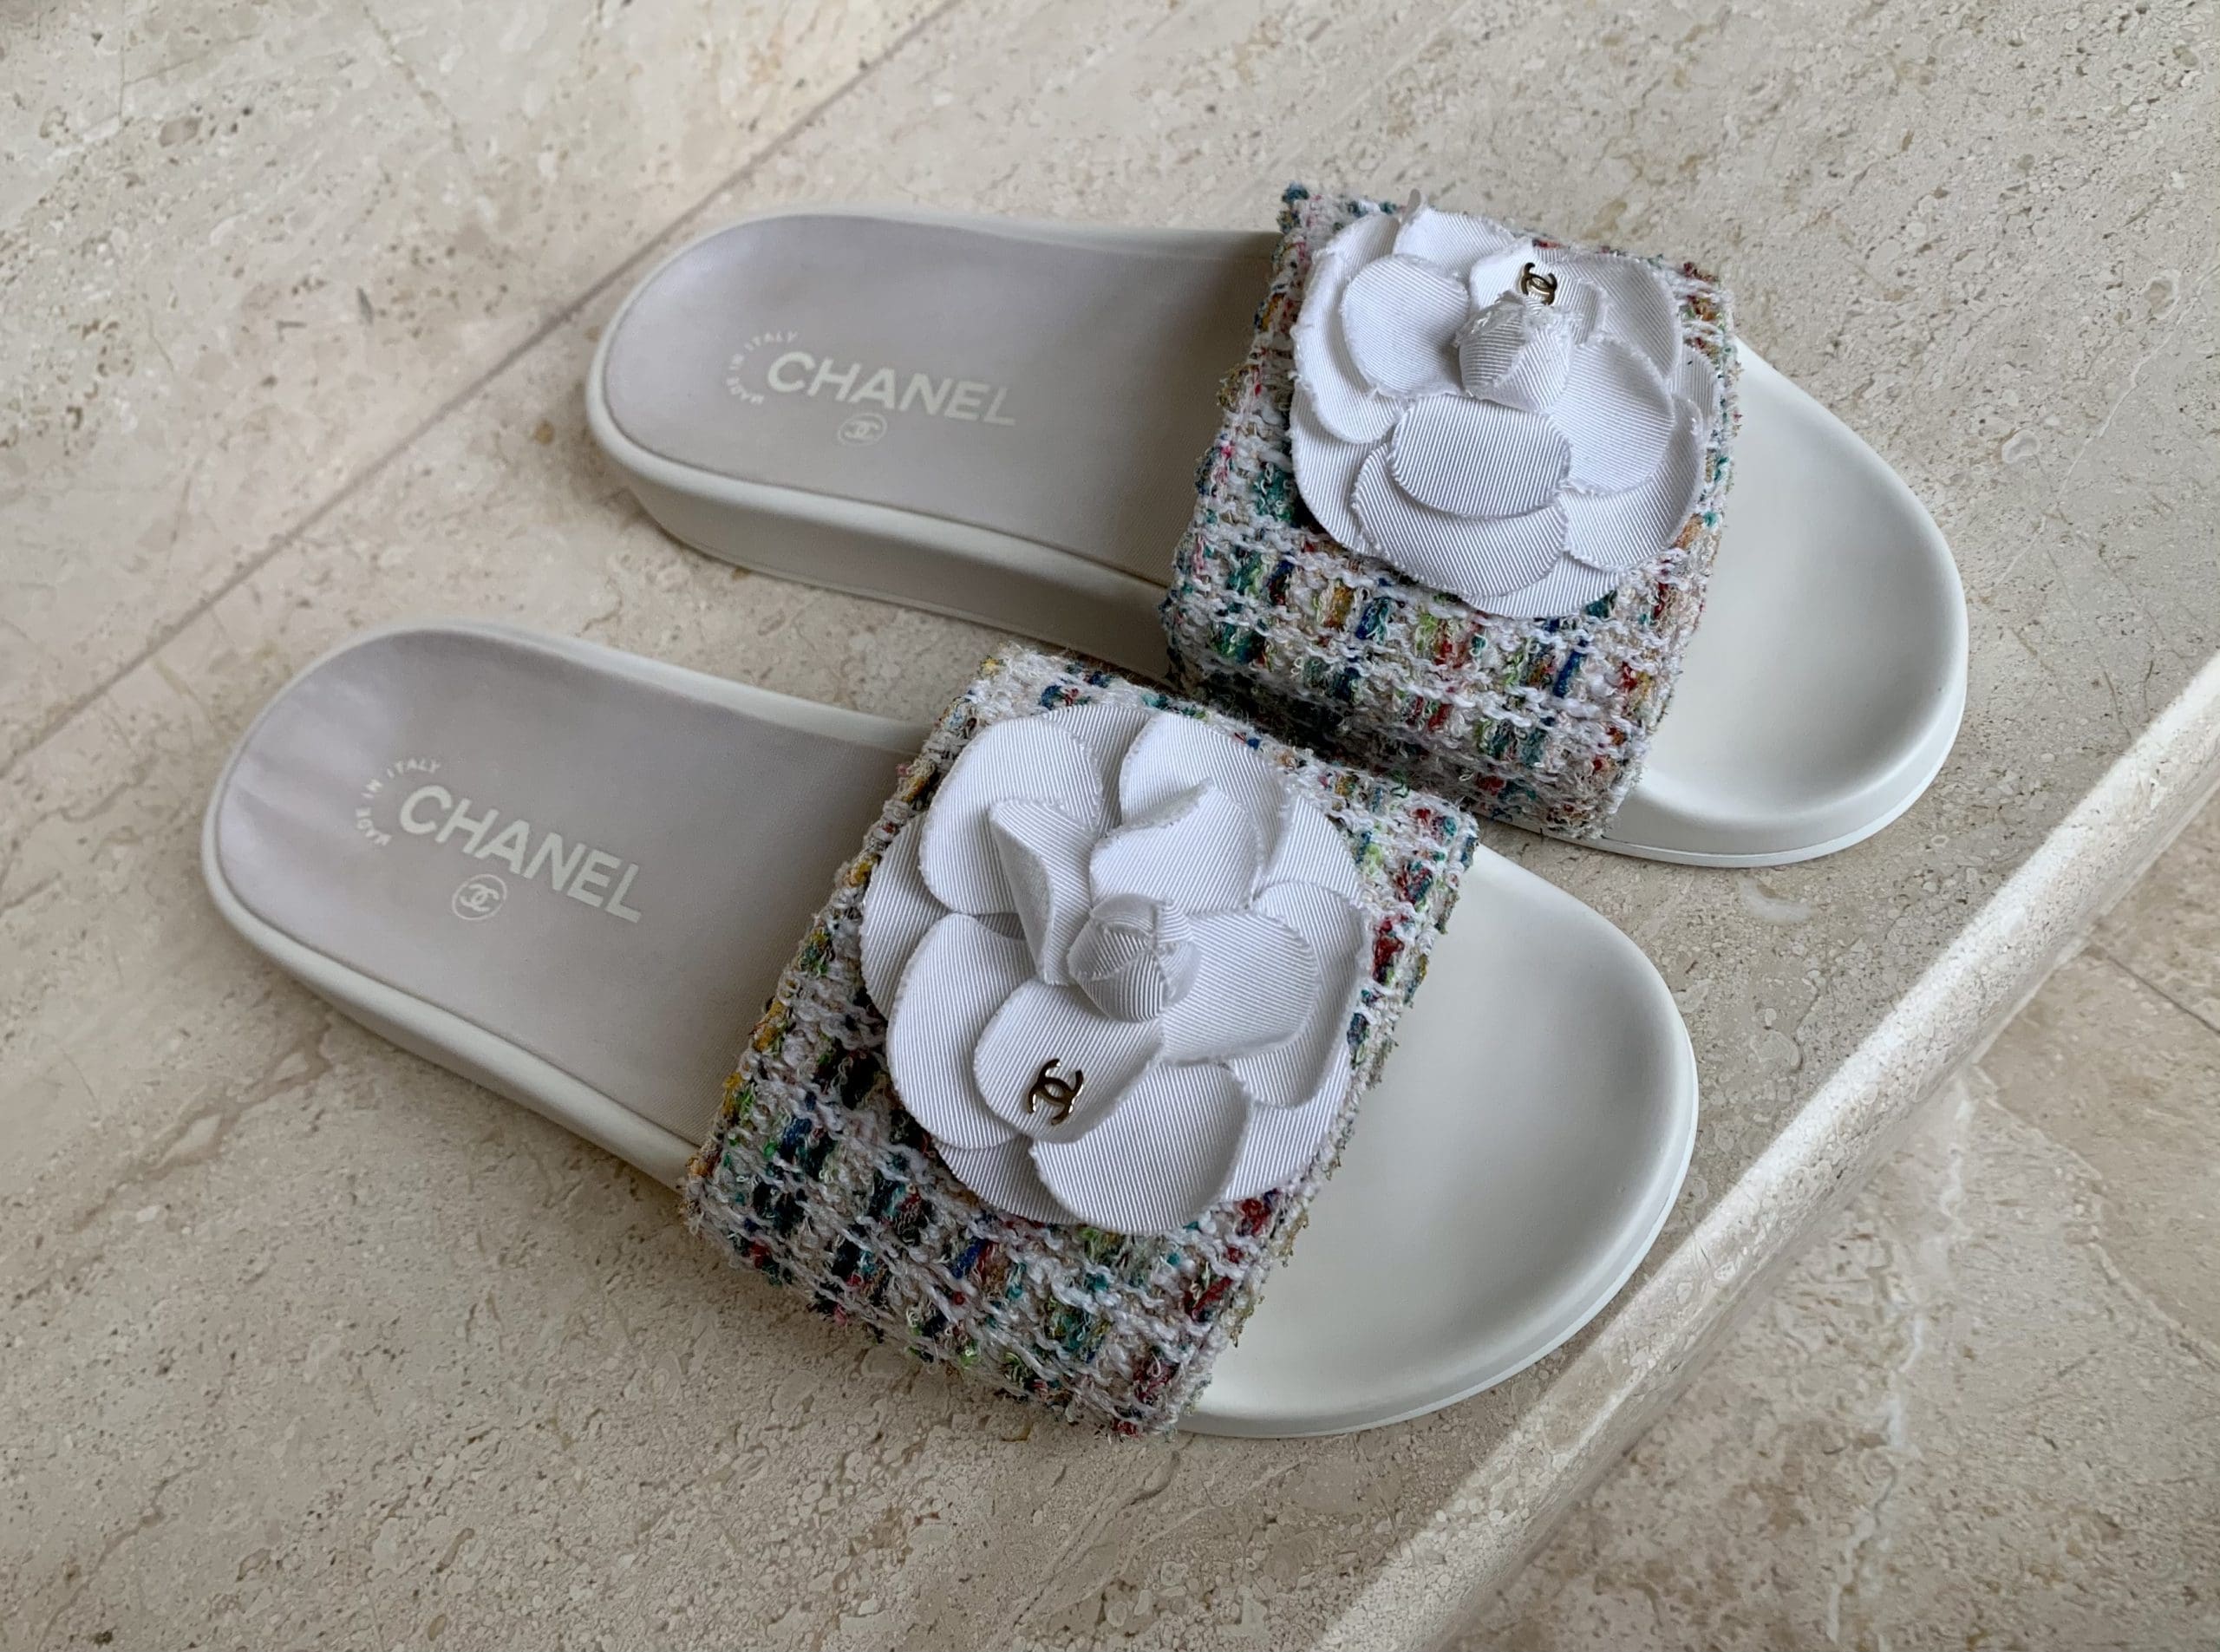 Chanel Flat Sandals tweed size 40, used - Reetzy